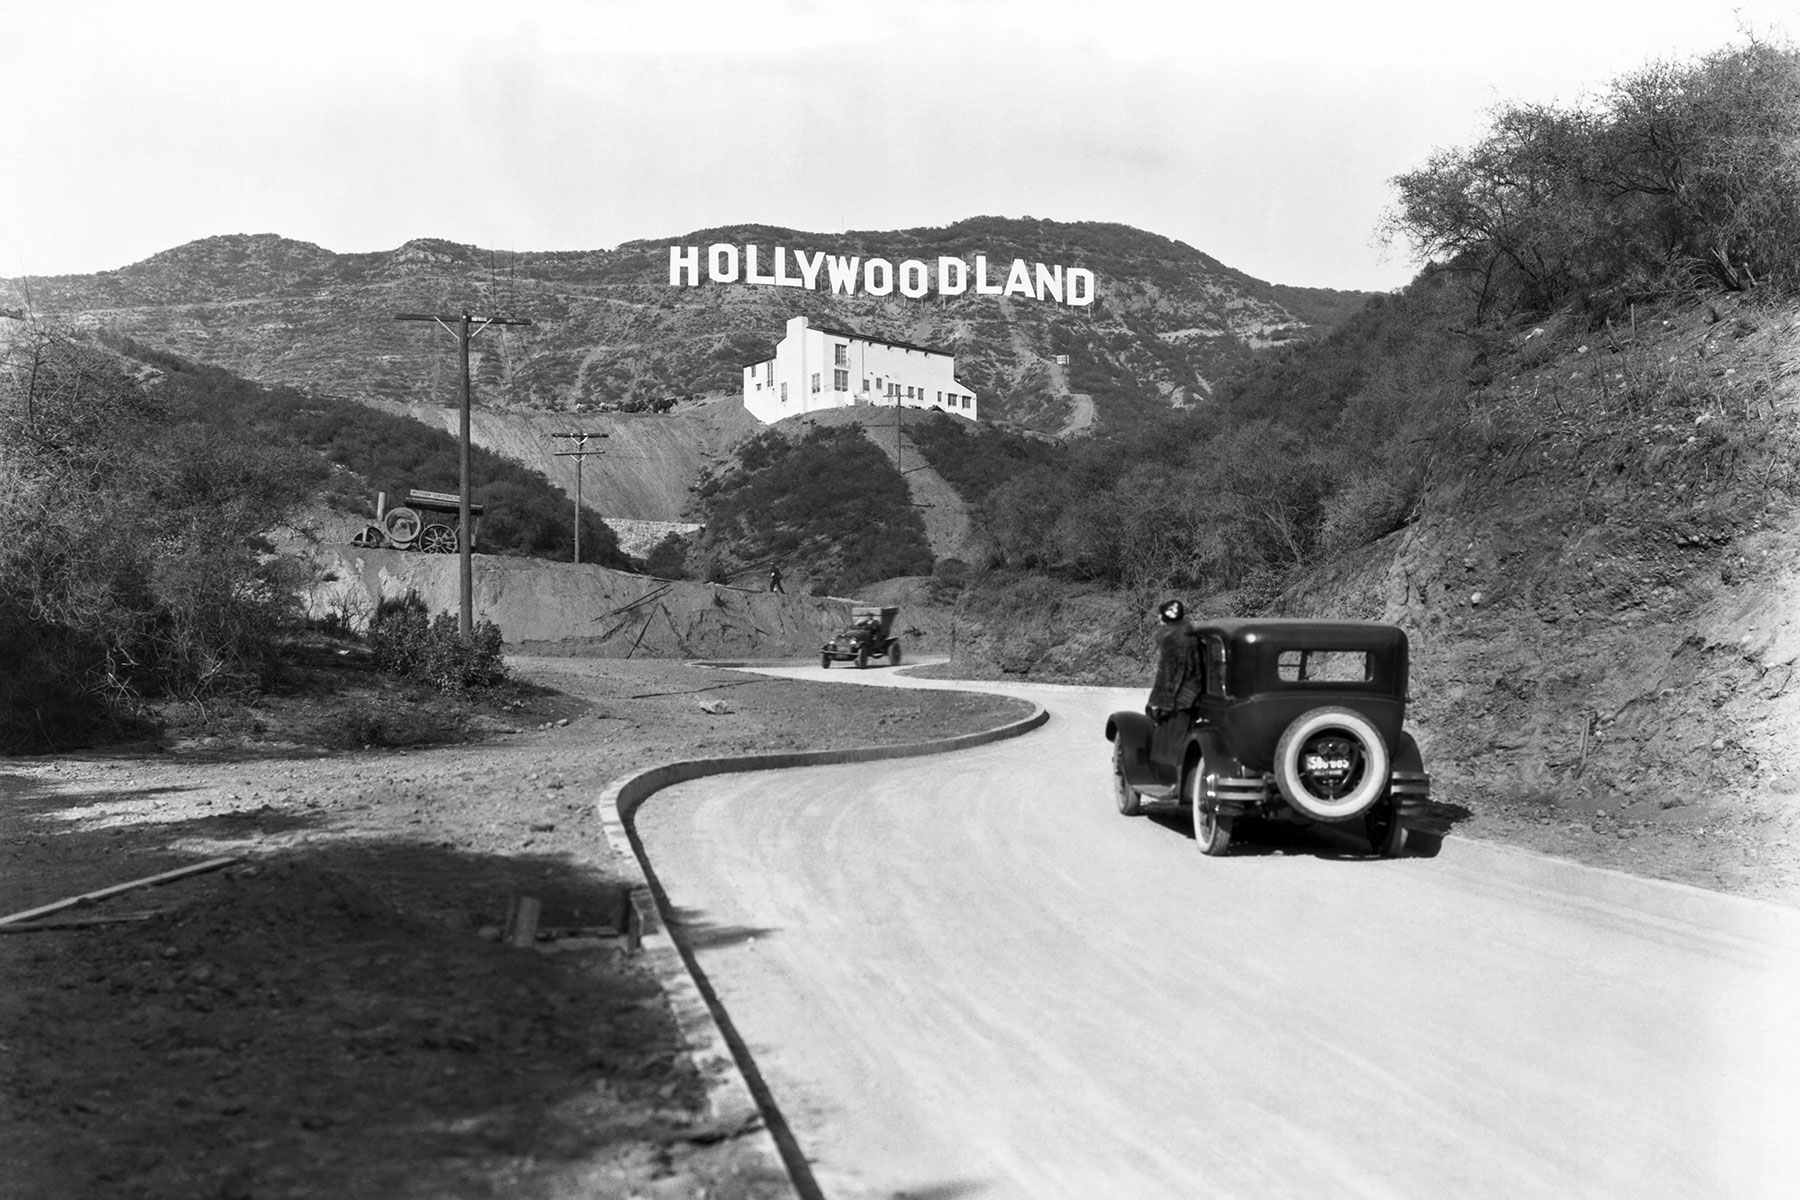 Hollywoodland sign in 1924